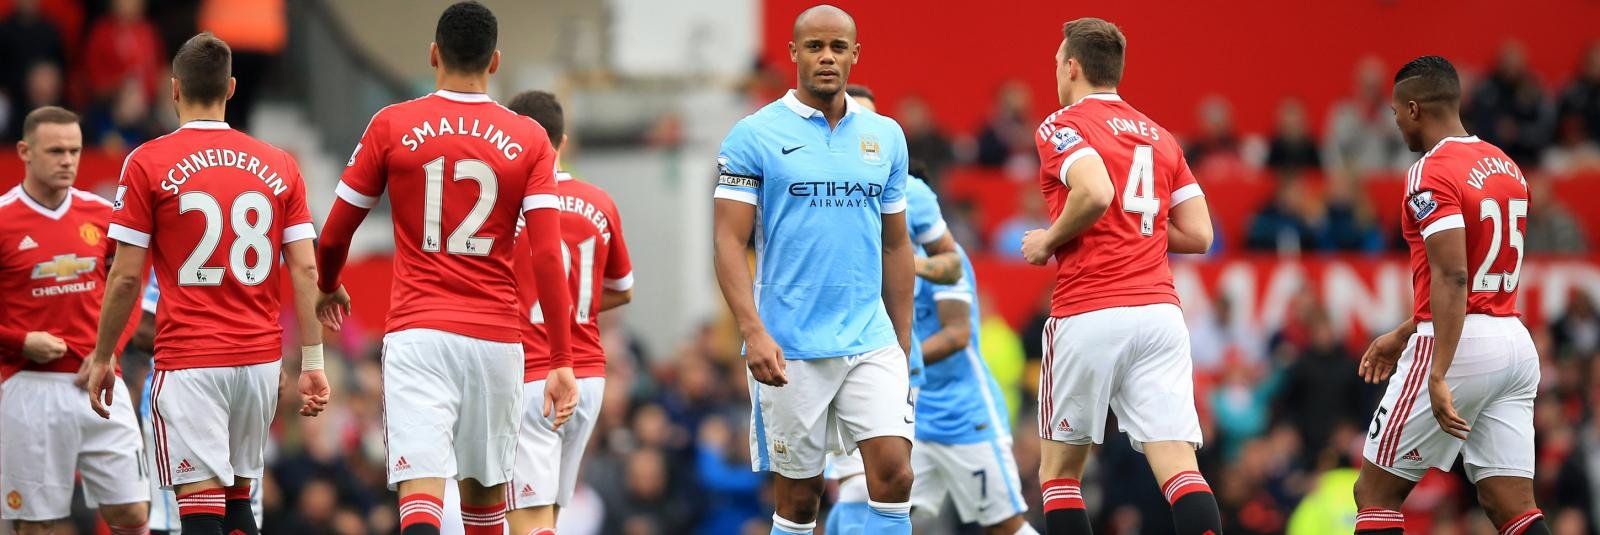 Manchester City vs Manchester United: Preview & Prediction